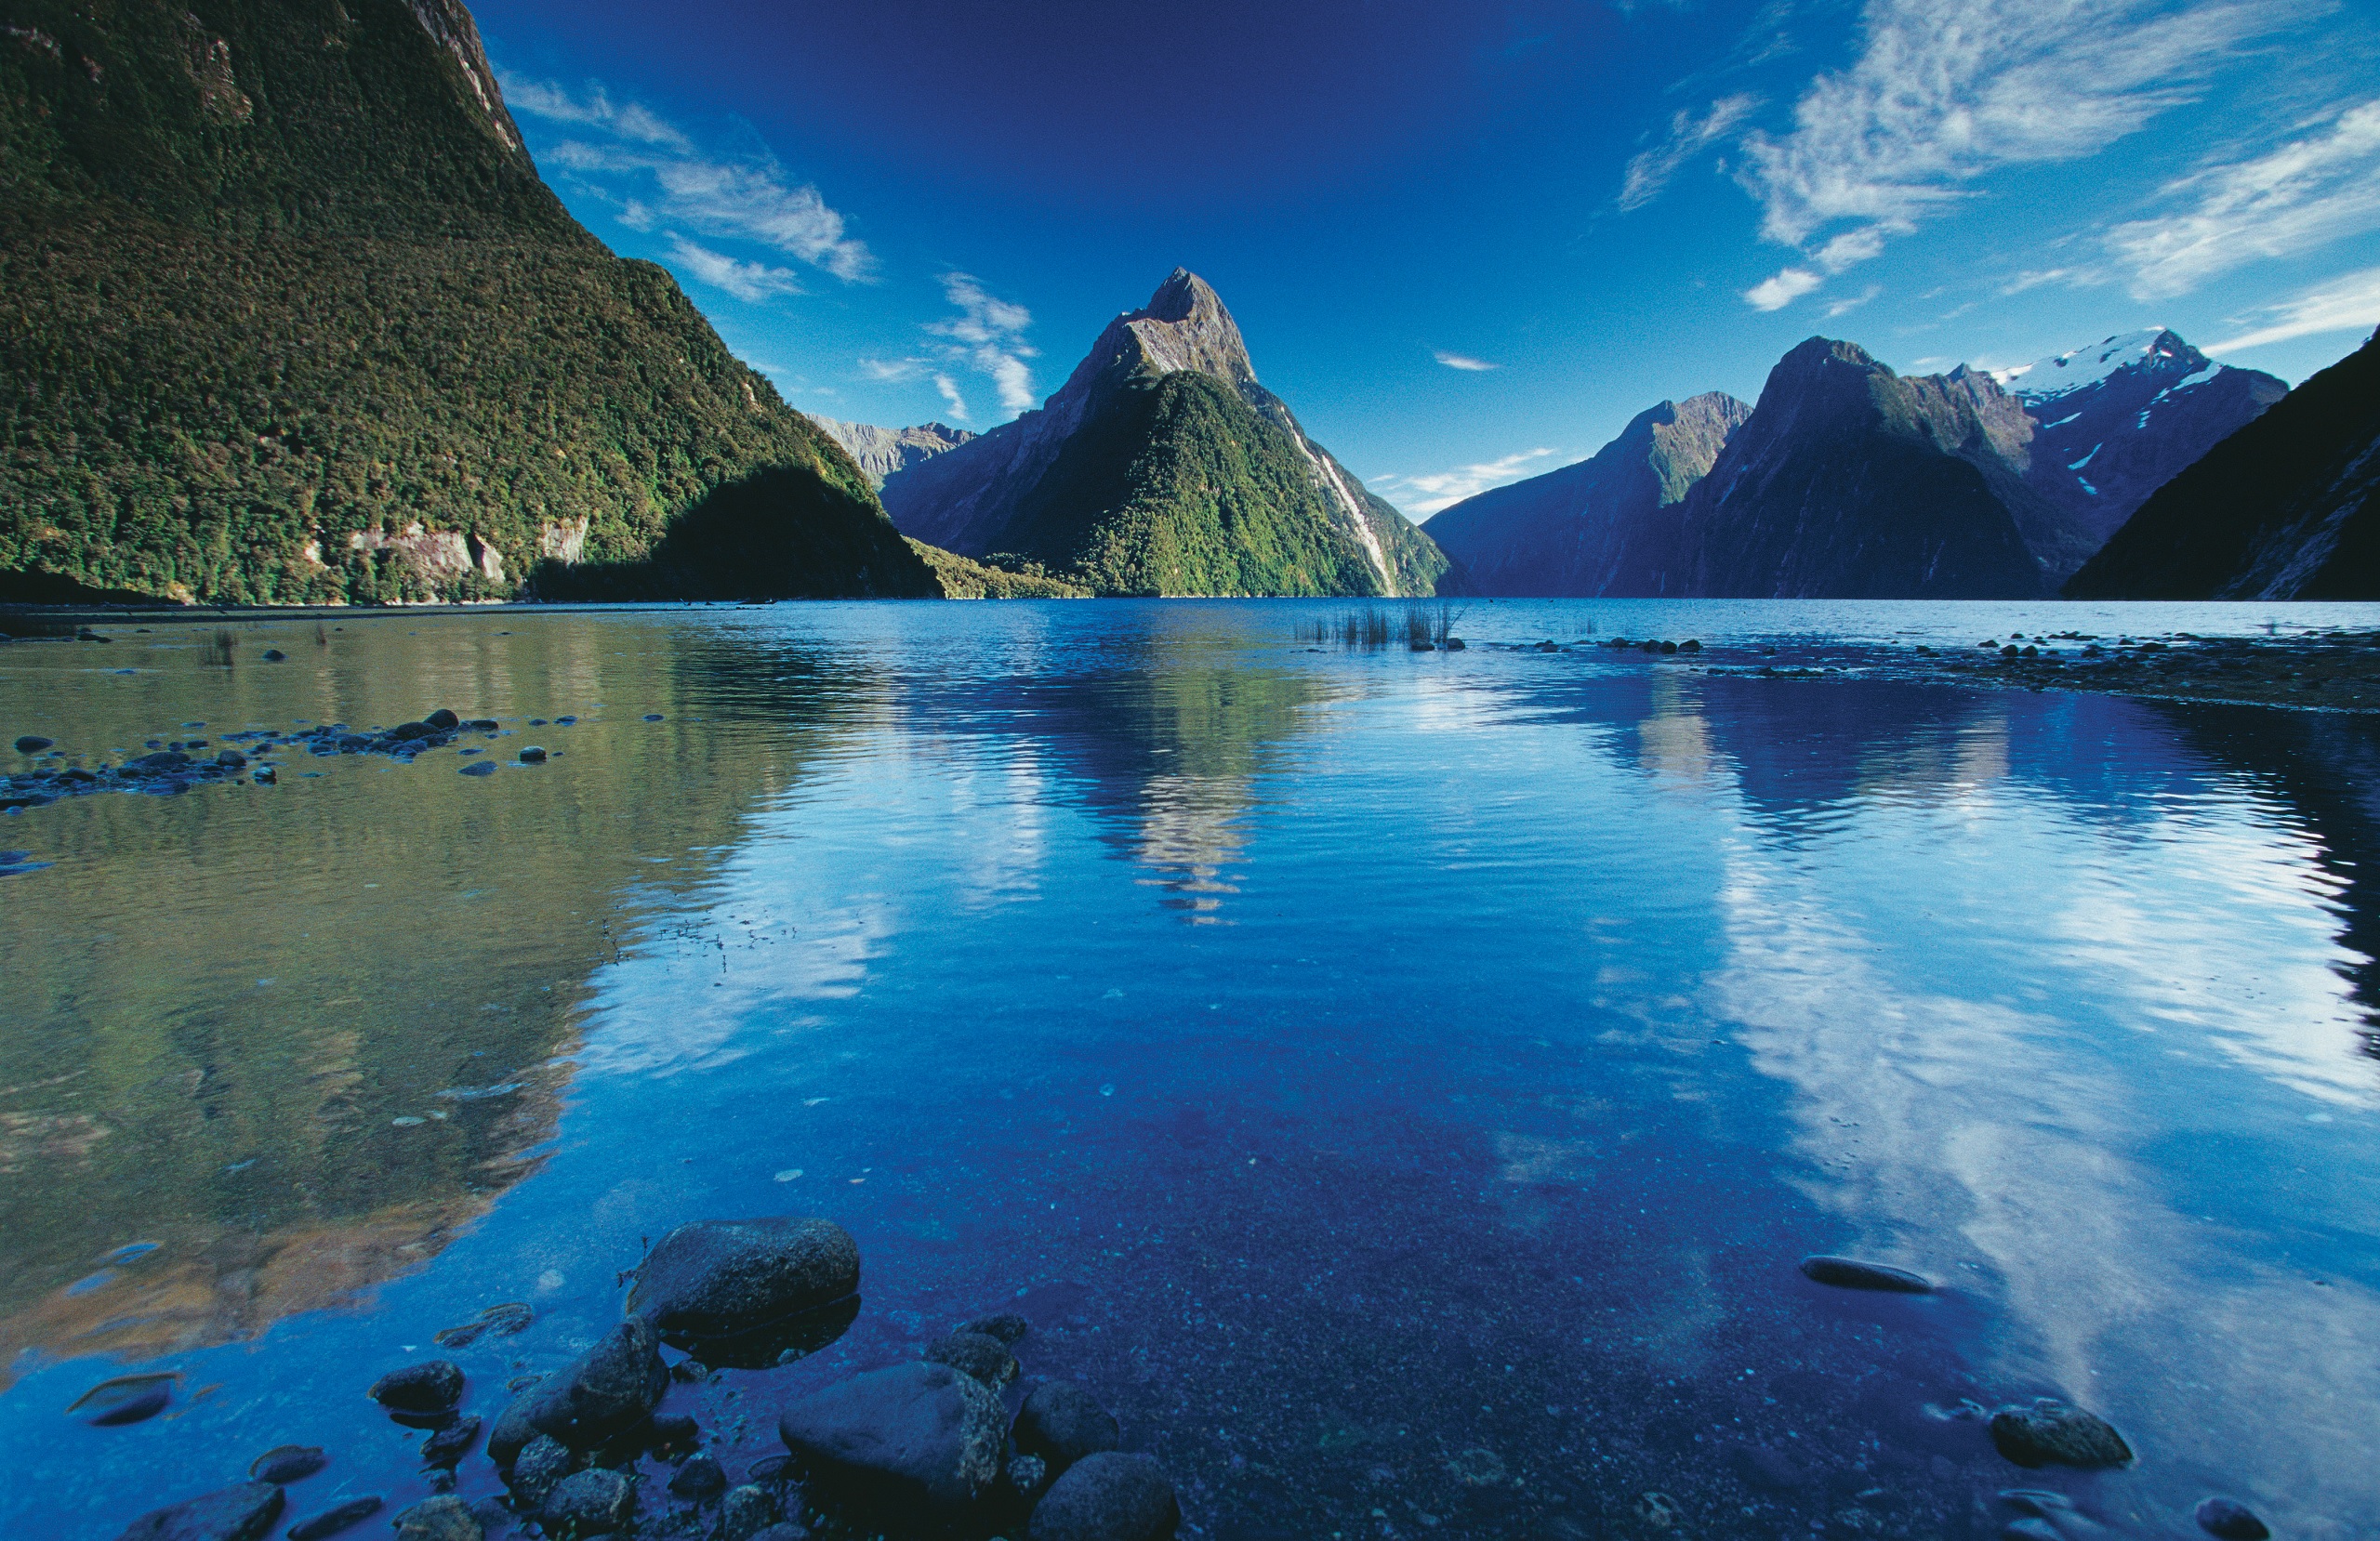 Reflection of Mitre Peak in Milford Sound